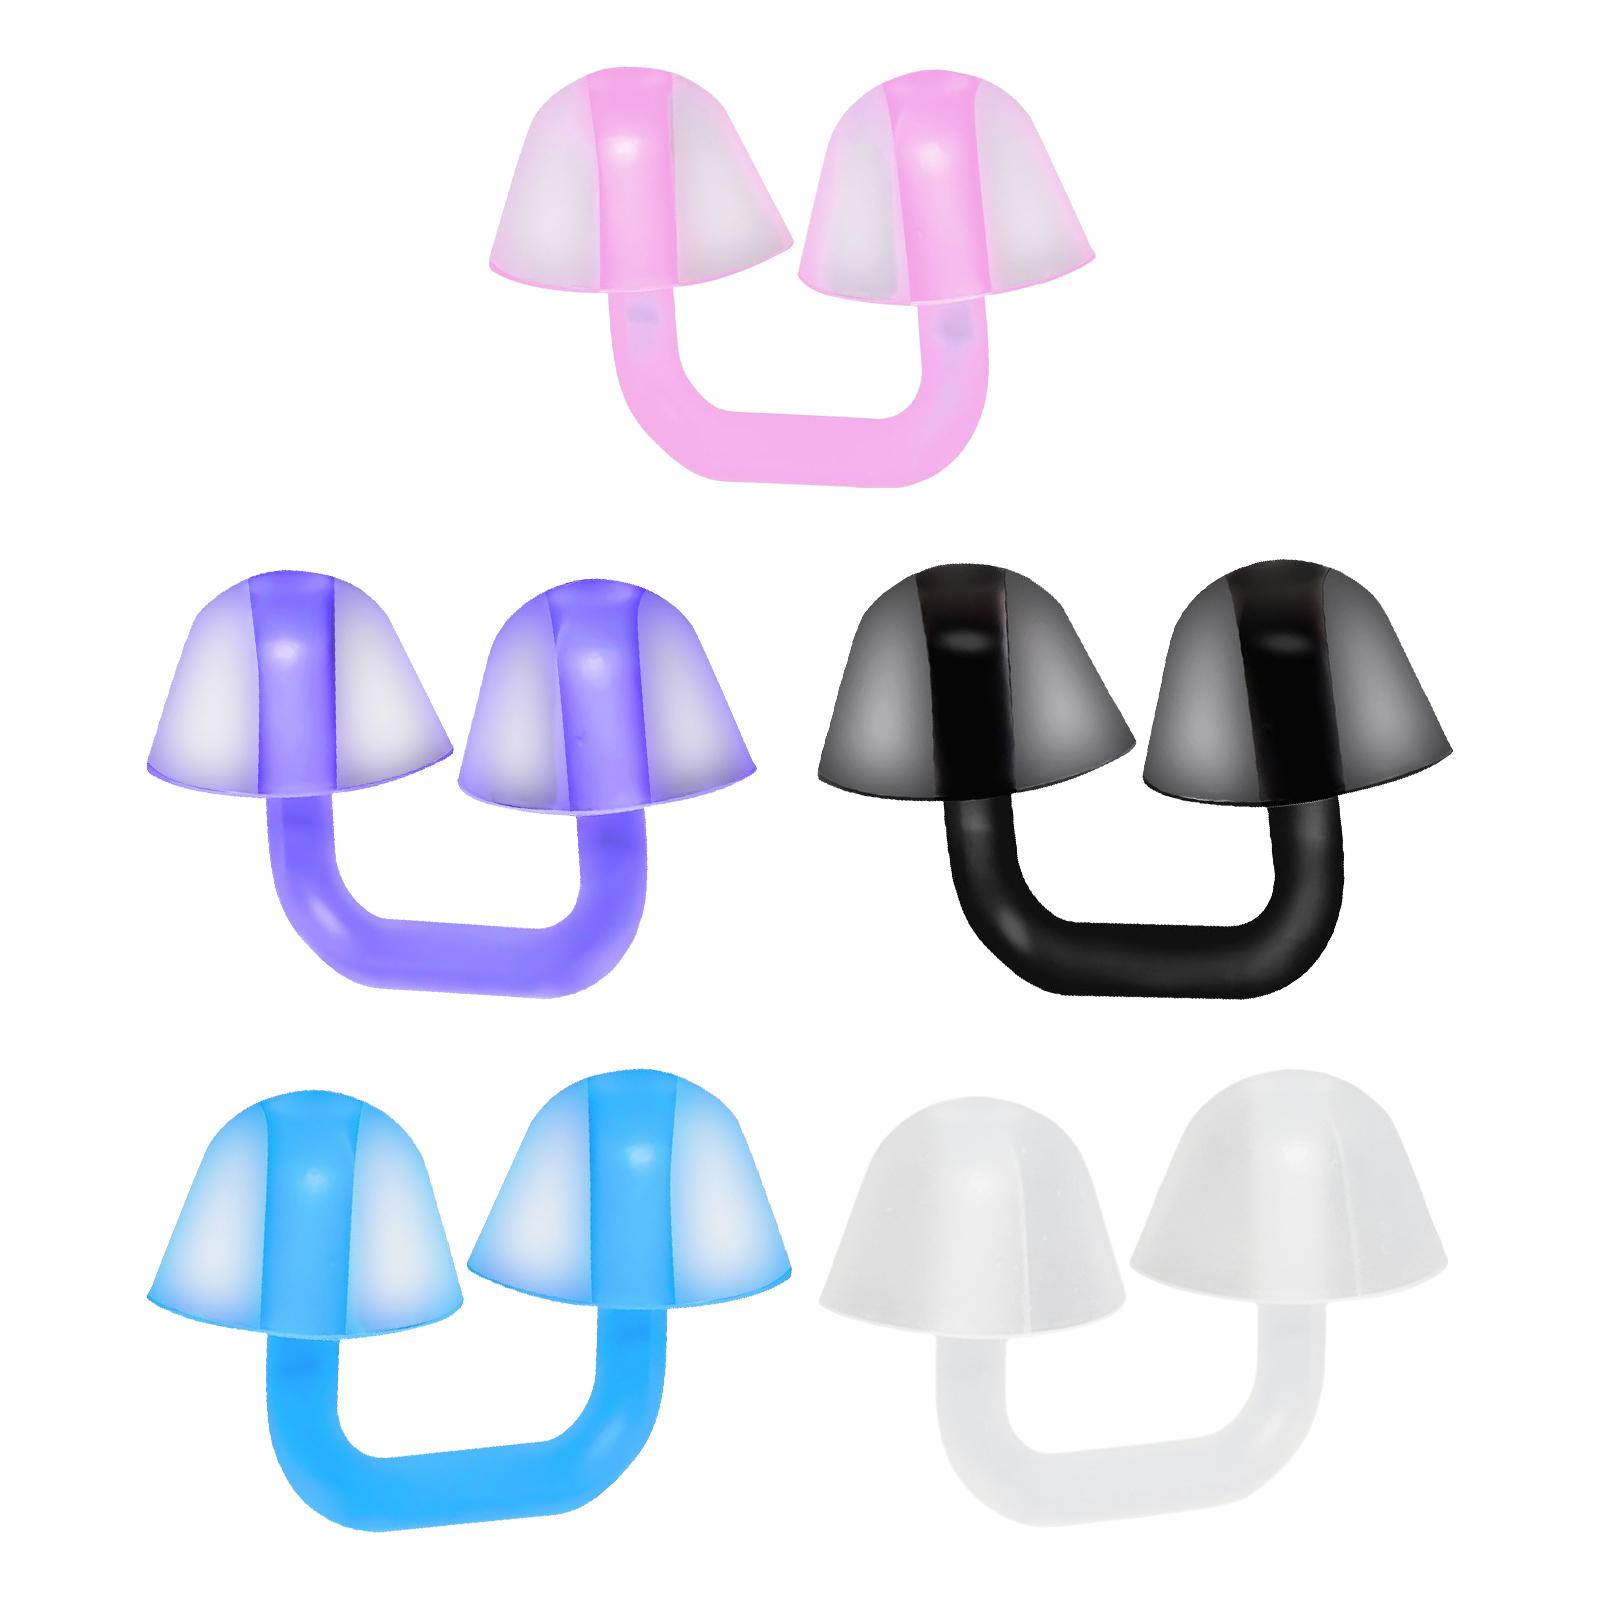 Swim Nose Clip Swimming Nose Clips Youth Swimming Nose Plugs Nose Protector for s Kids Pool Practice Surfing Children